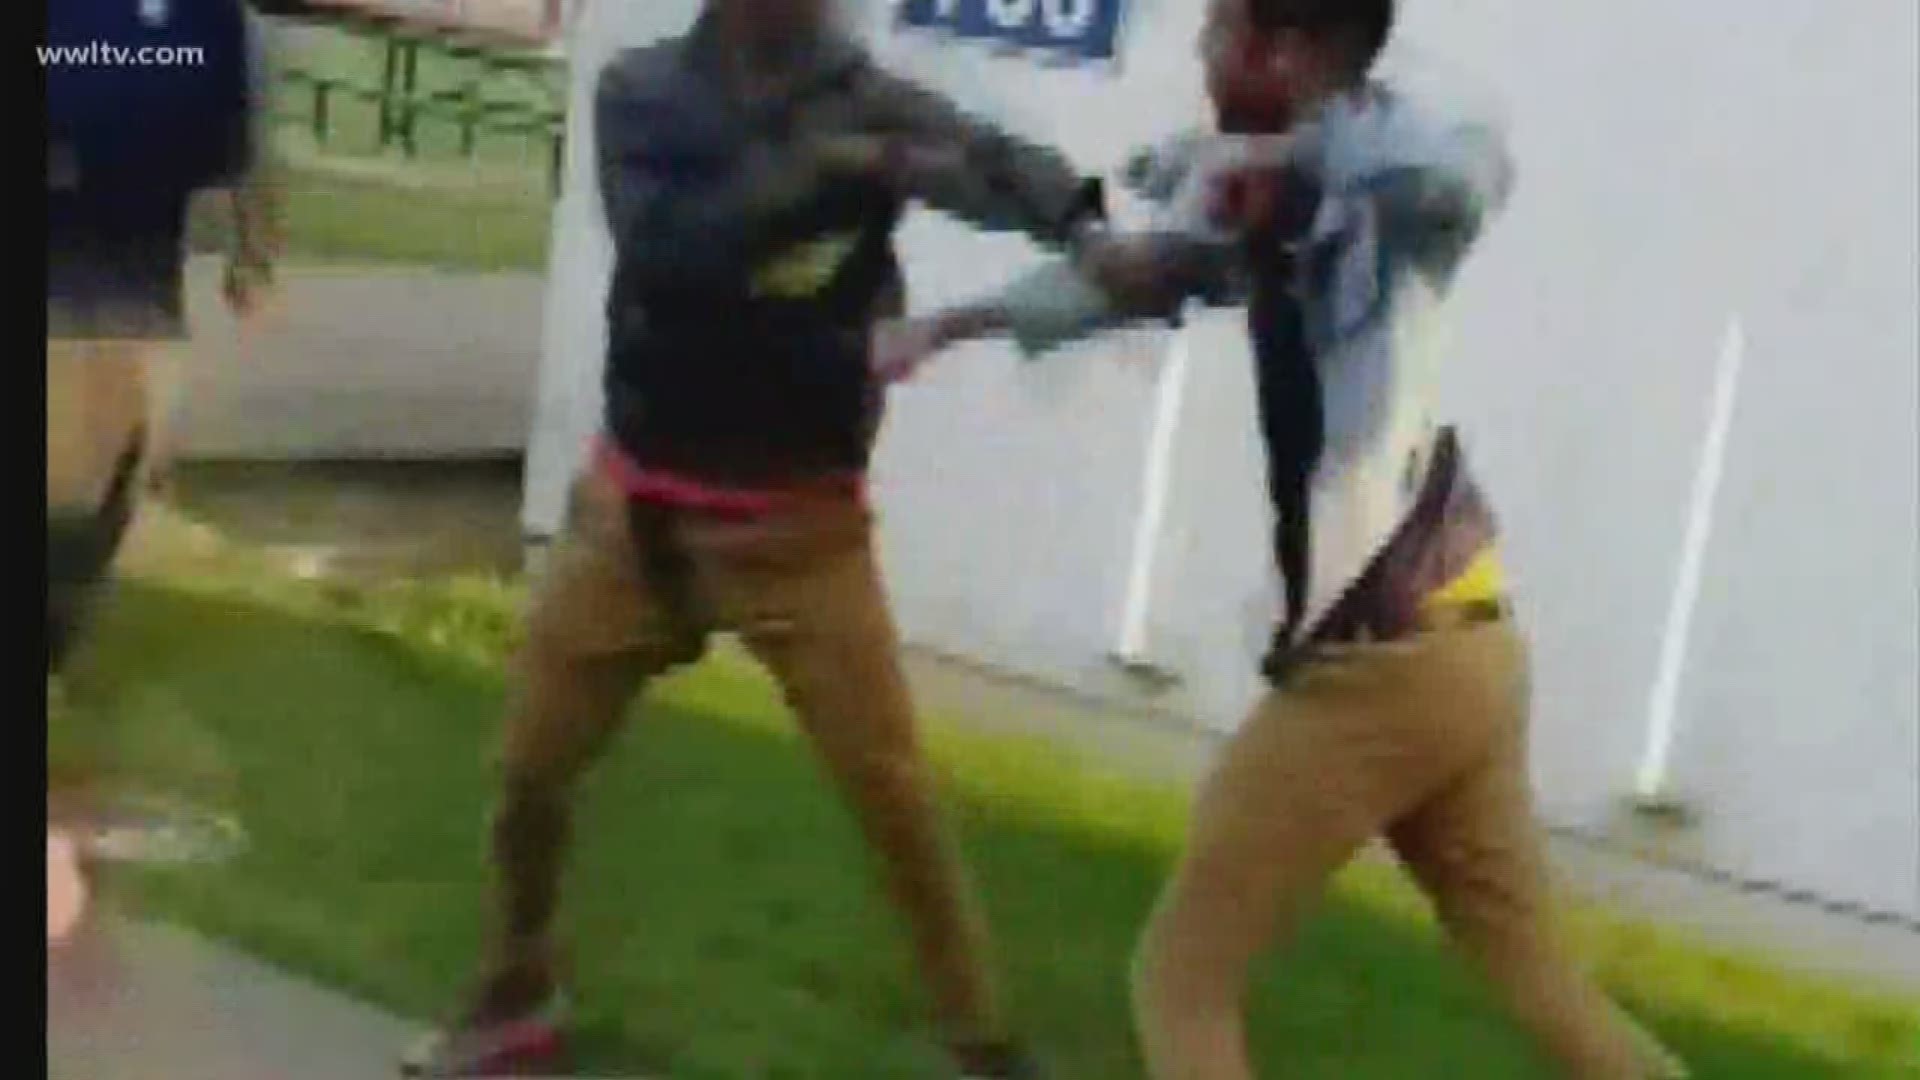 John Ehret under scrutiny for fighting on campus